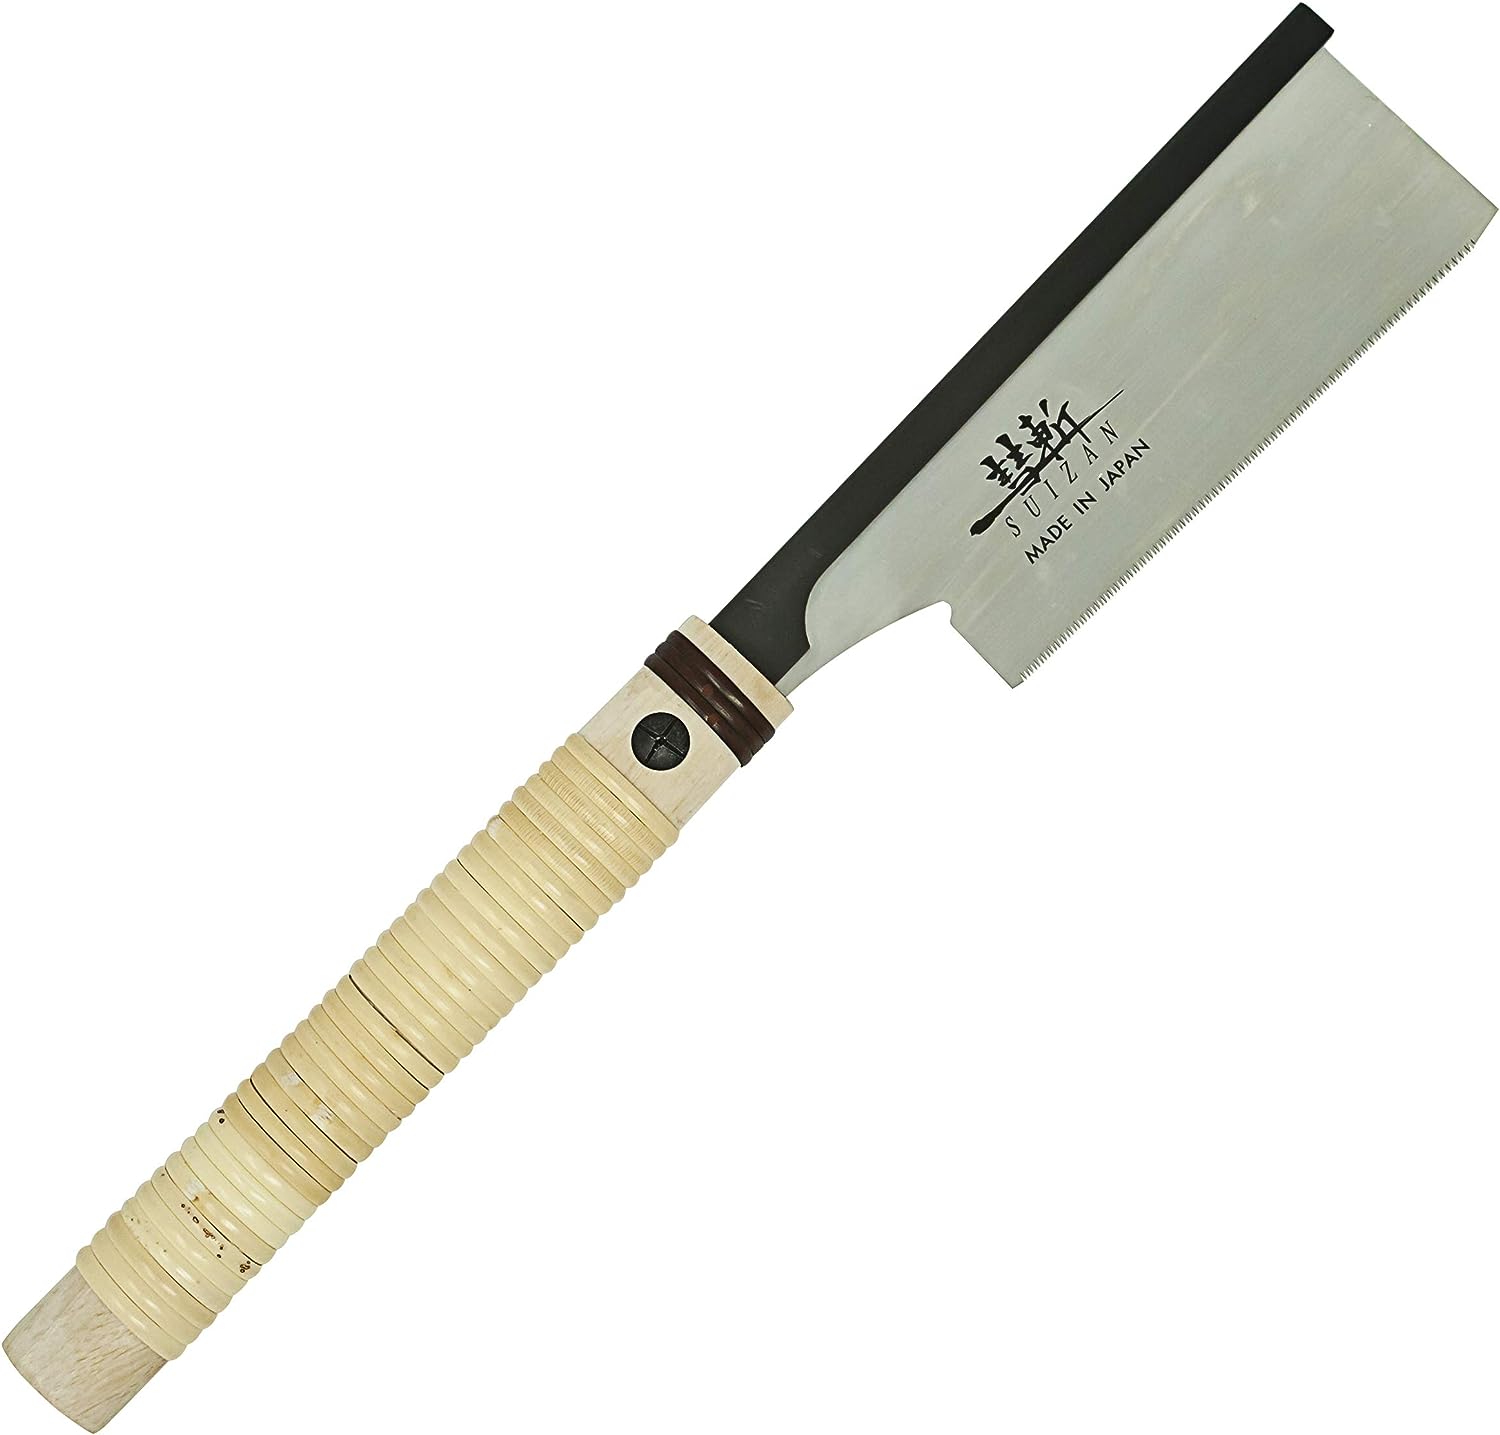 Suizan Japanese Dozuki Dovetail Pull Saw 150mm Power Tool Services